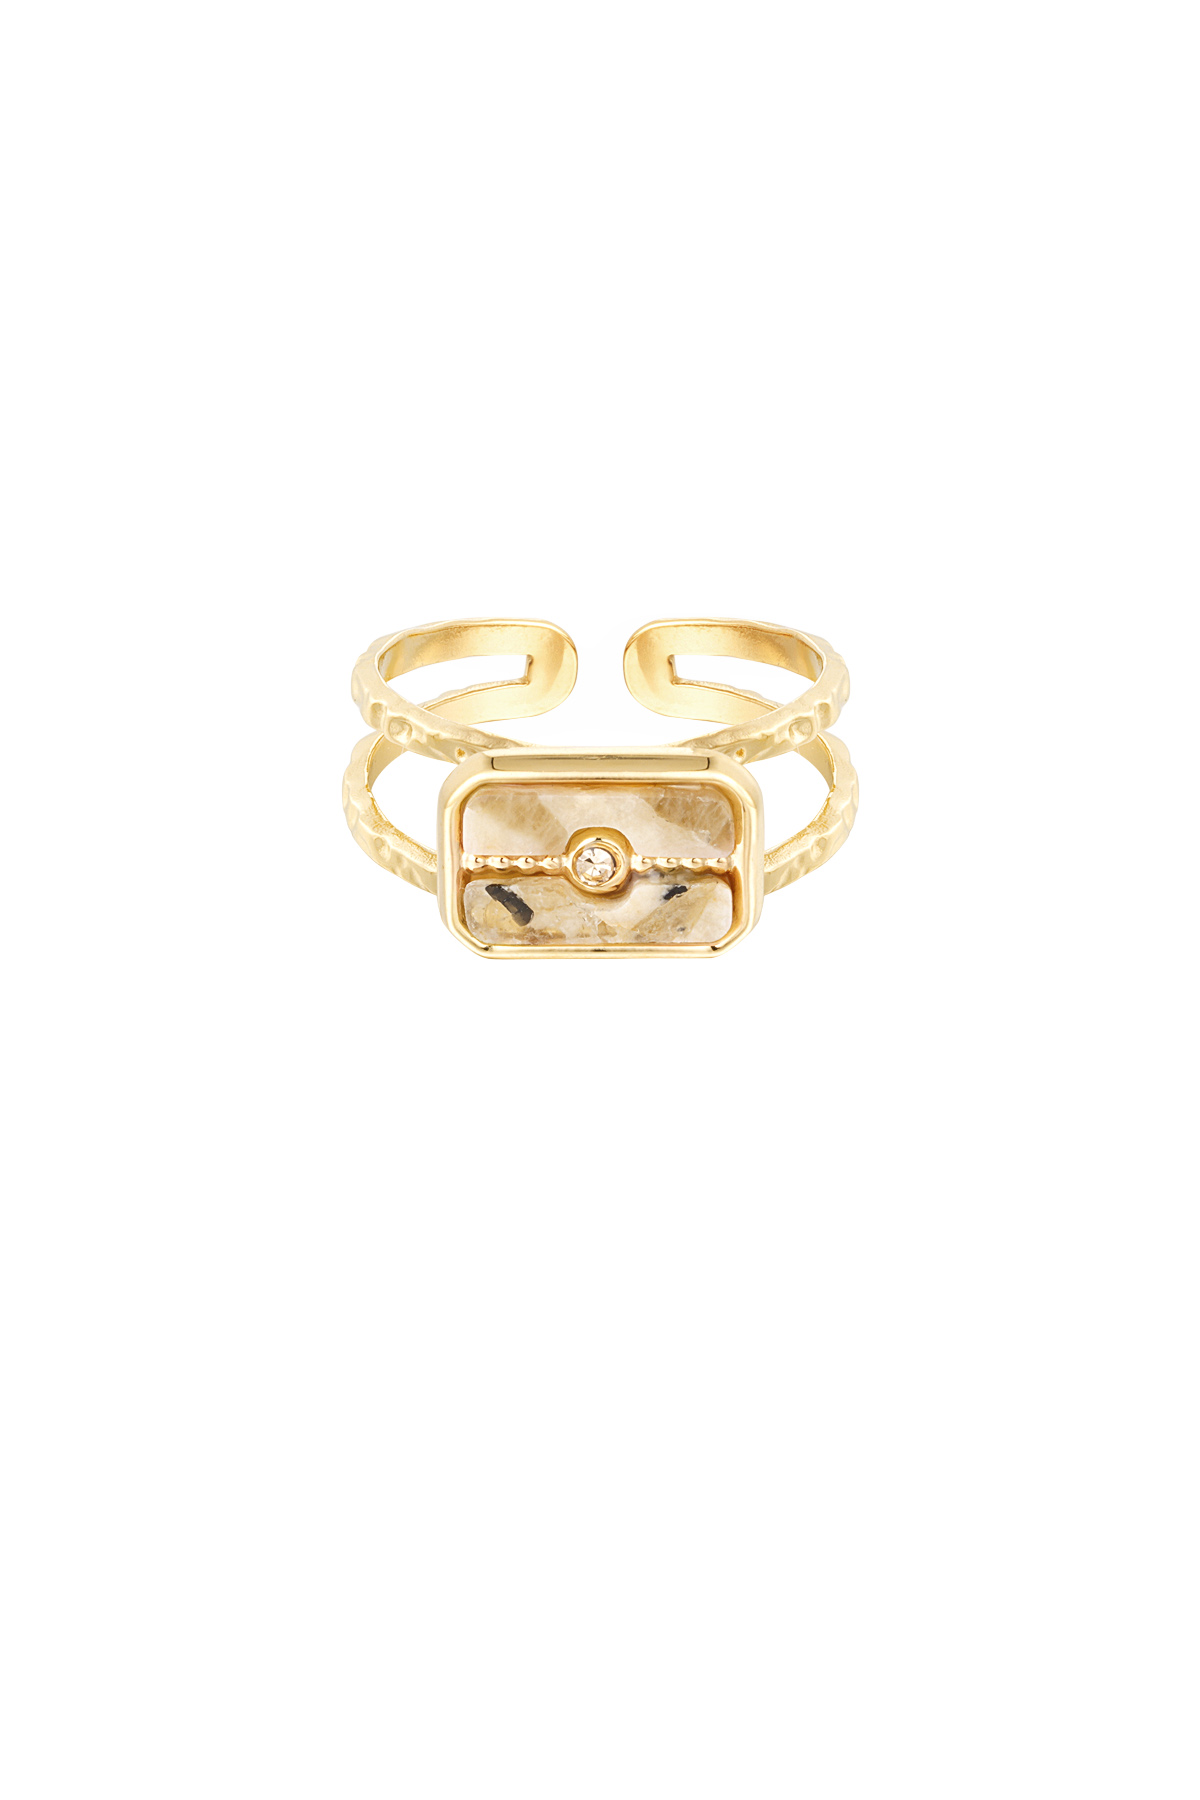 Ring decorated stone - gold/beige h5 